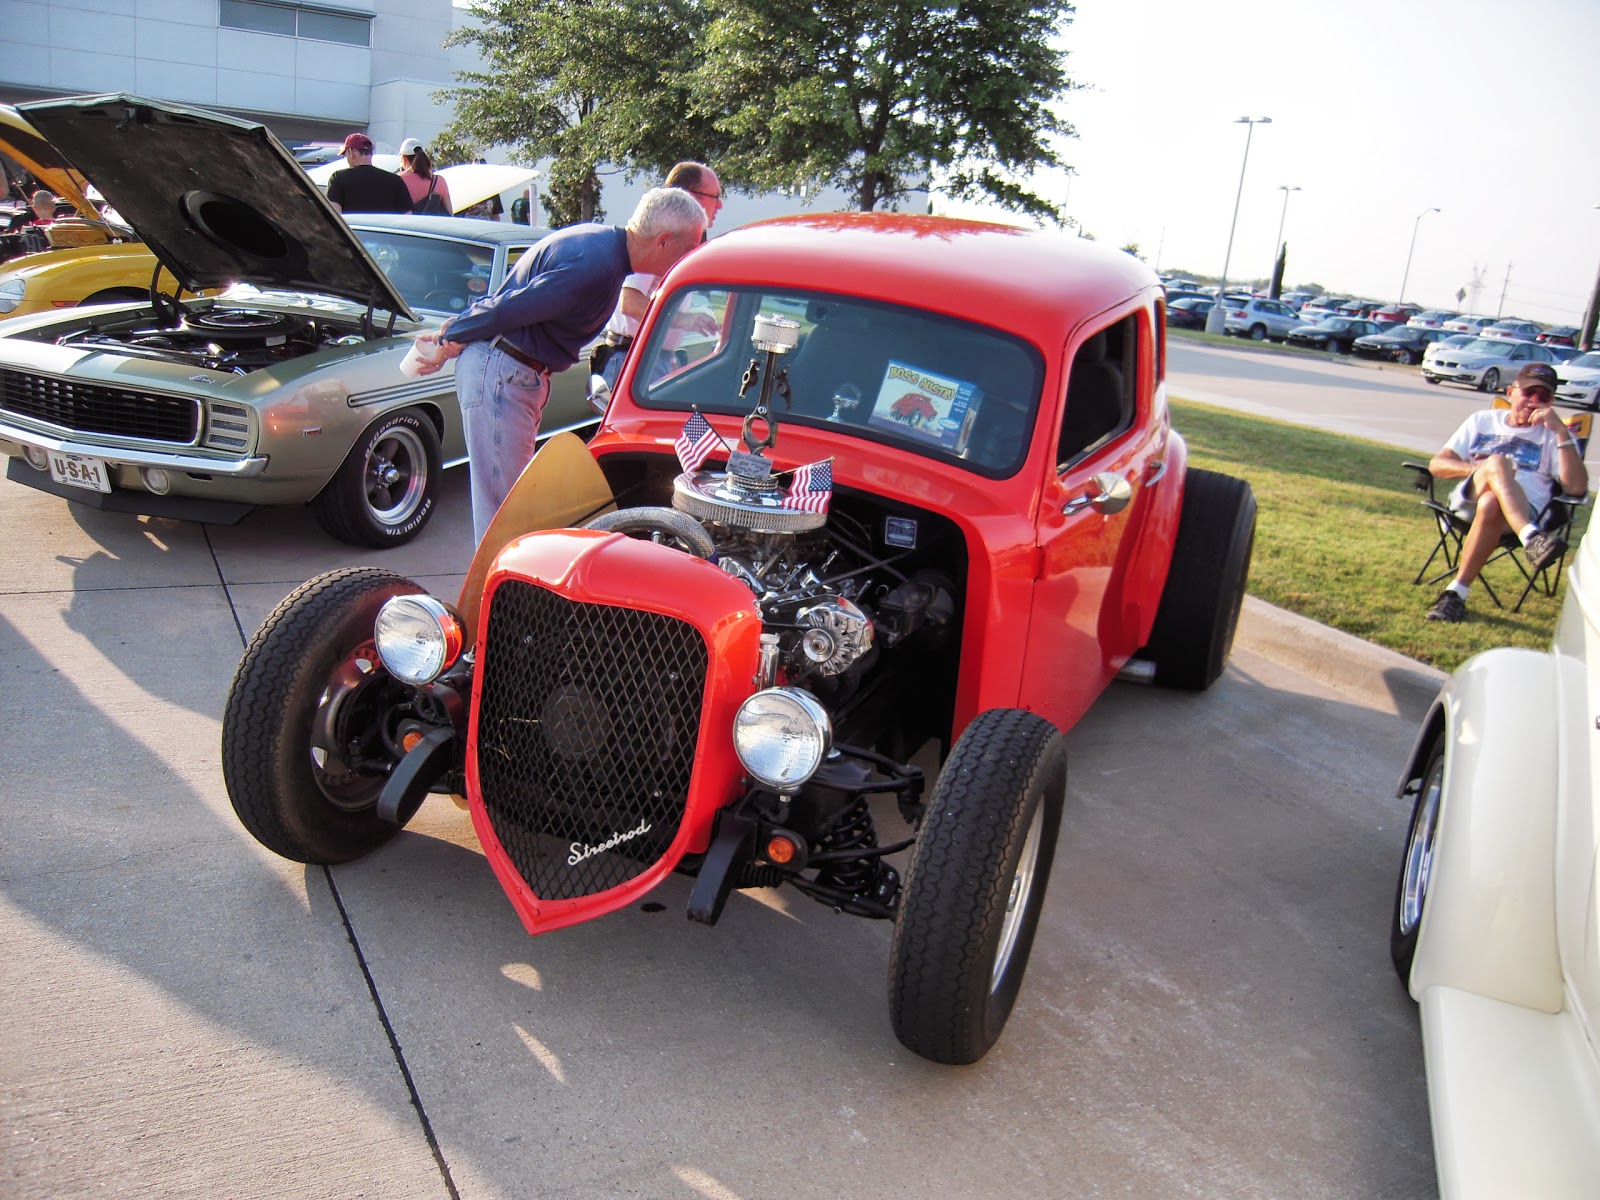 The grill says street rod, the fire wall says rat rod, the rocker says ...